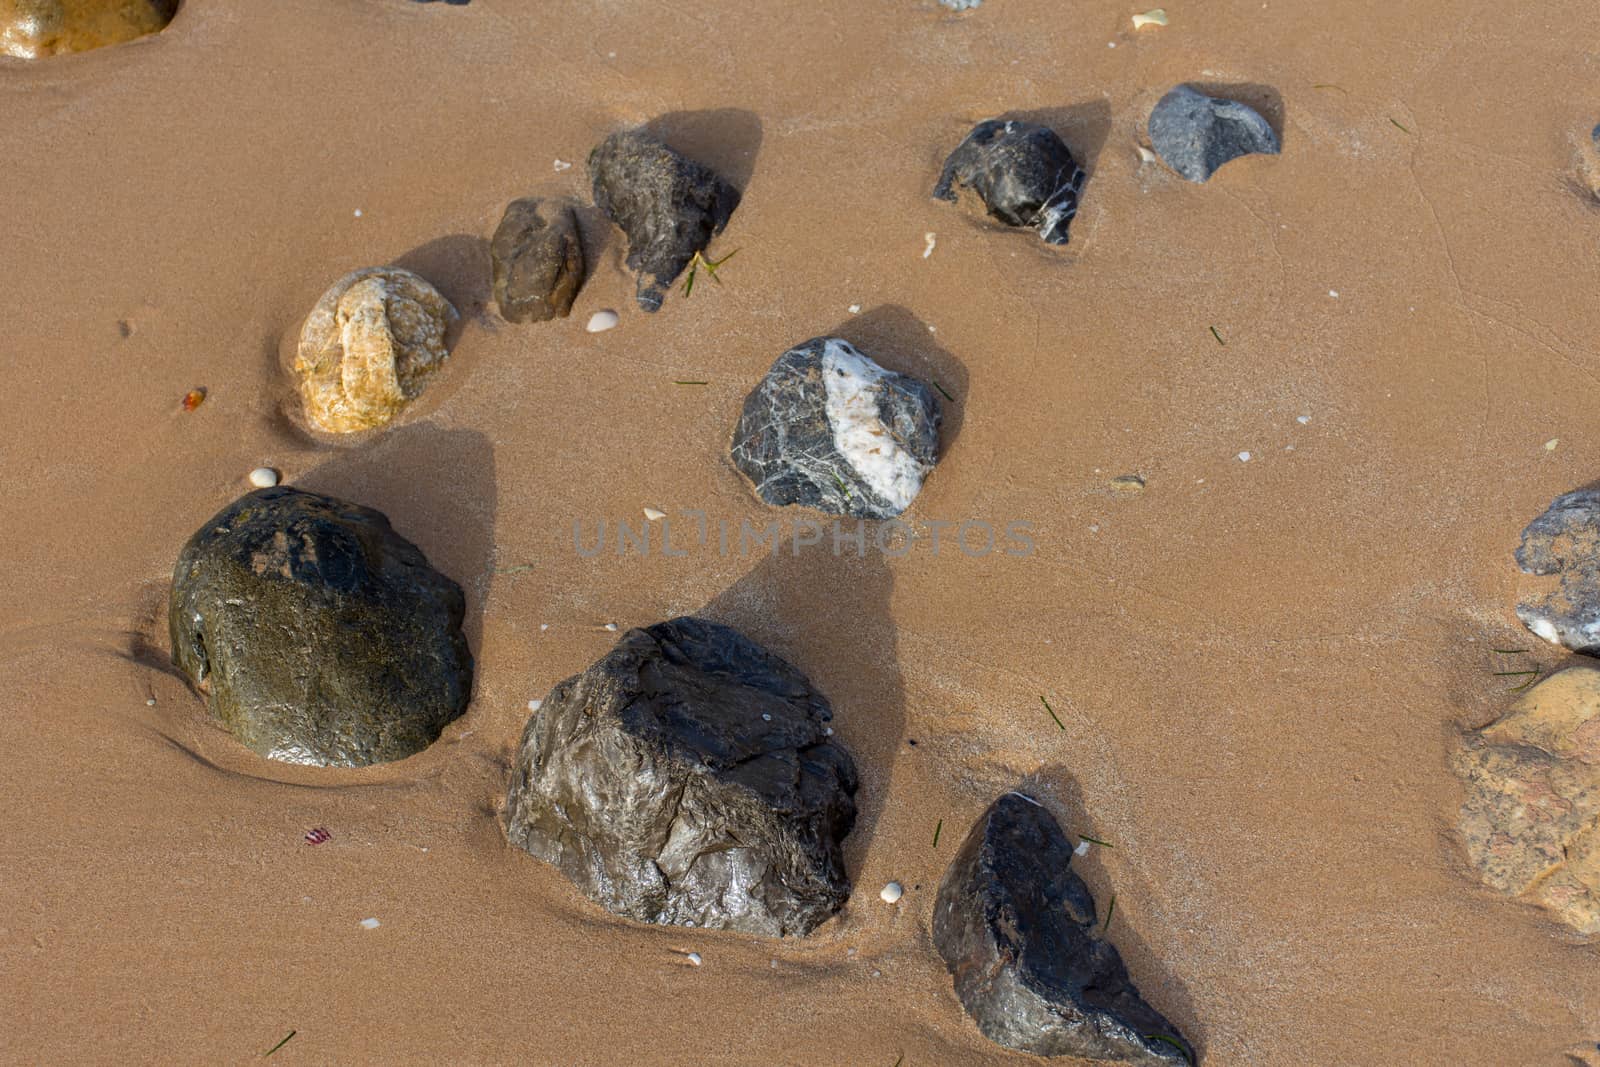 Rocks on the beach seashore in the sand and water. Quiet, peacef by kingmaphotos